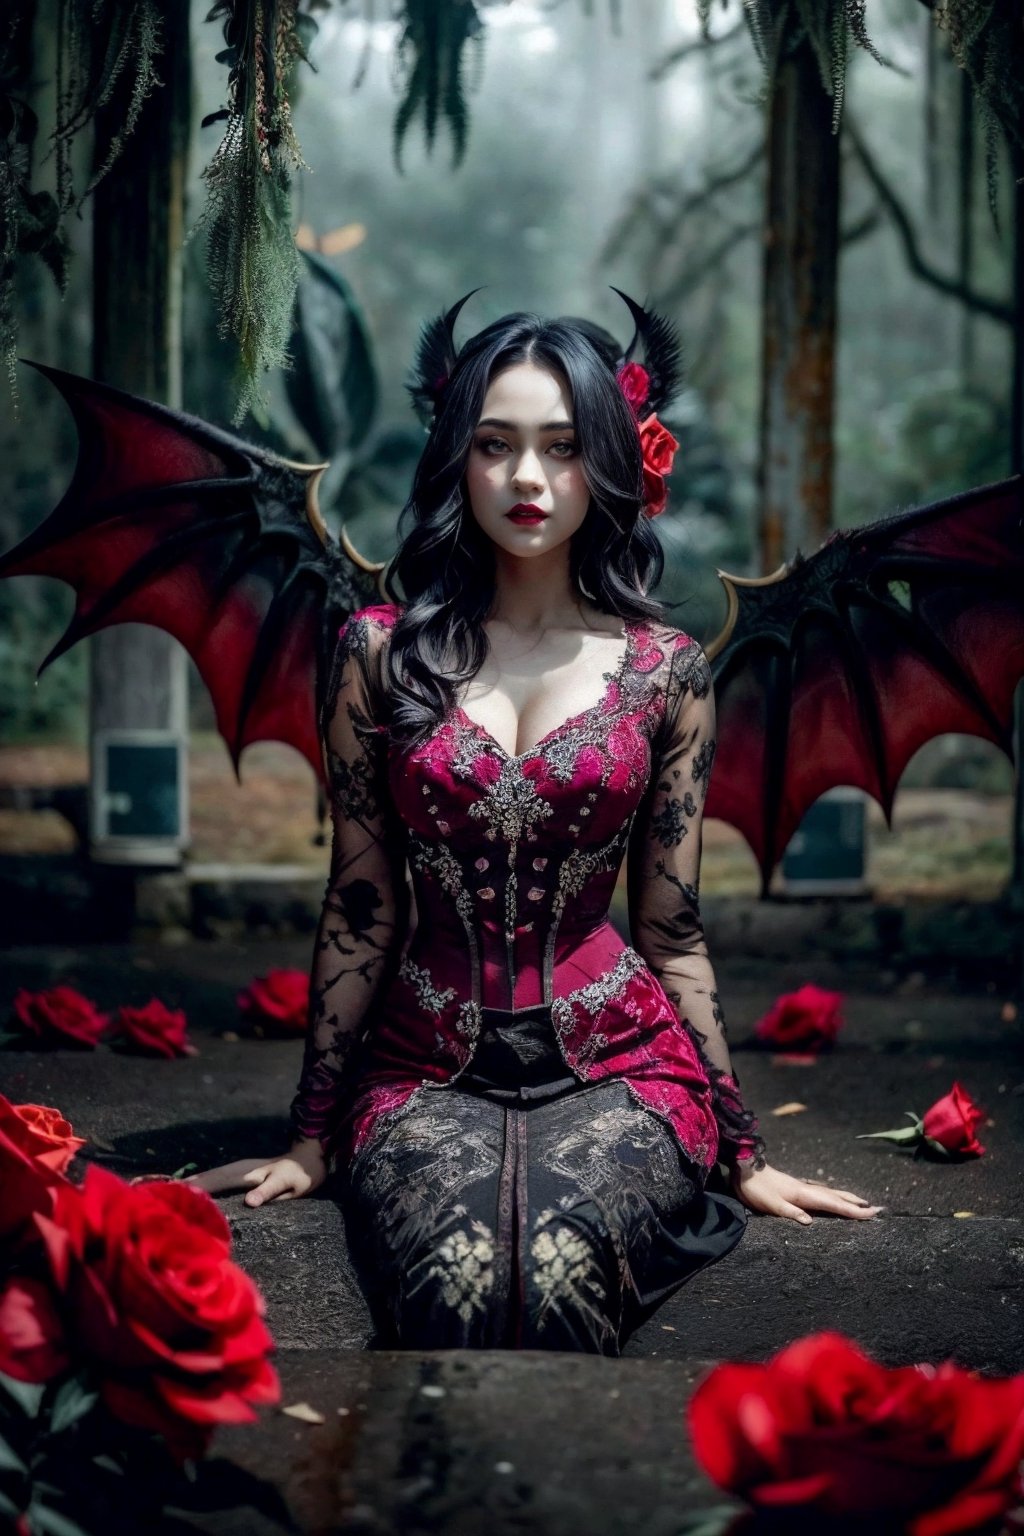 Illustrate a beautiful yet terrifying vampire woman with black wings, surrounded by striking red roses. Ensure to capture the intricate details and eerie ambiance in the image.kebaya,girl